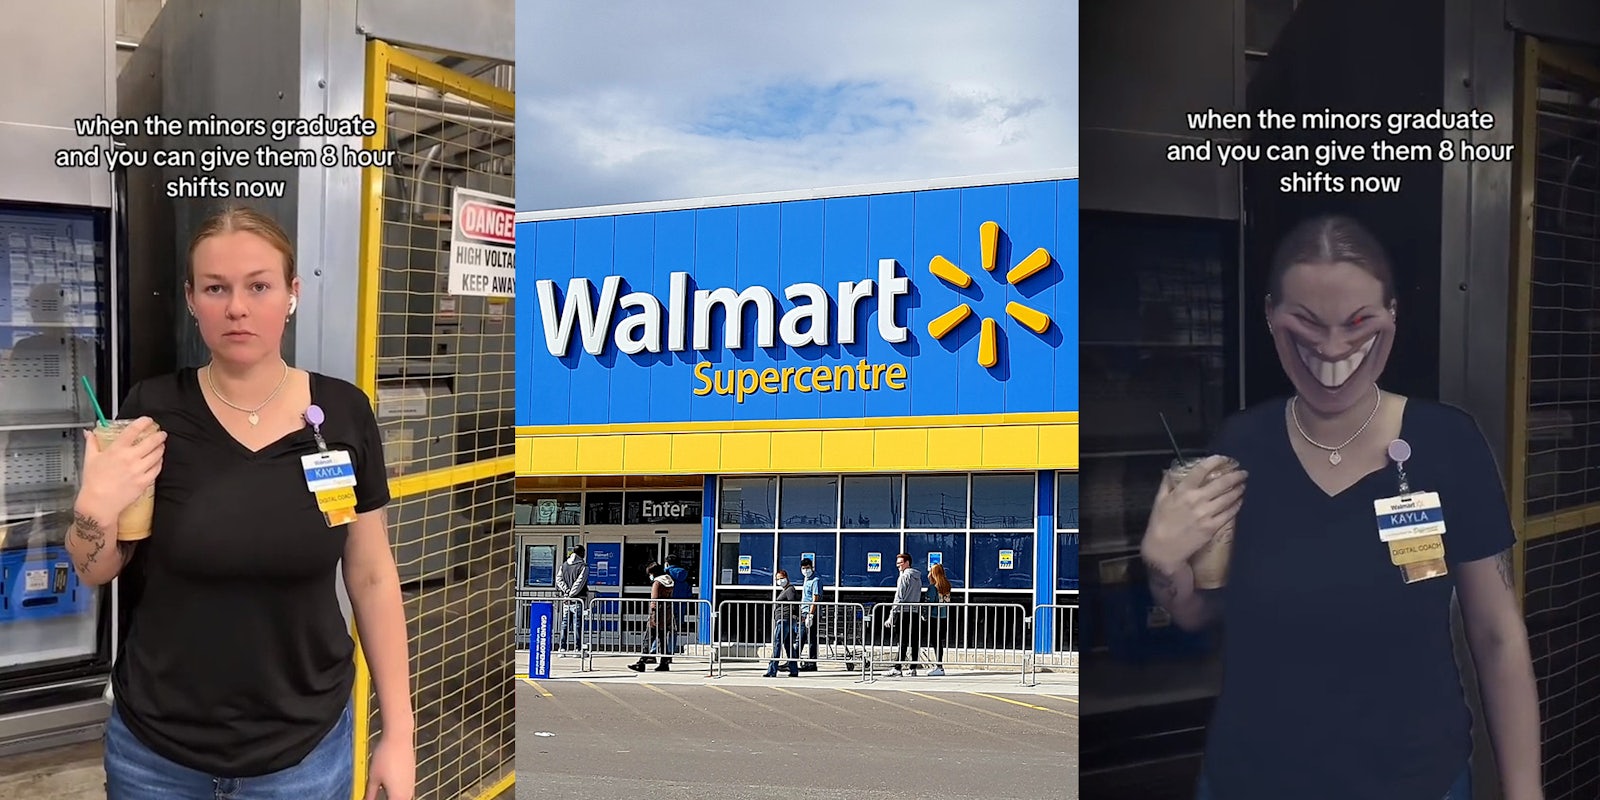 Walmart manager excited that her teen workers graduated so she can now schedule them longer